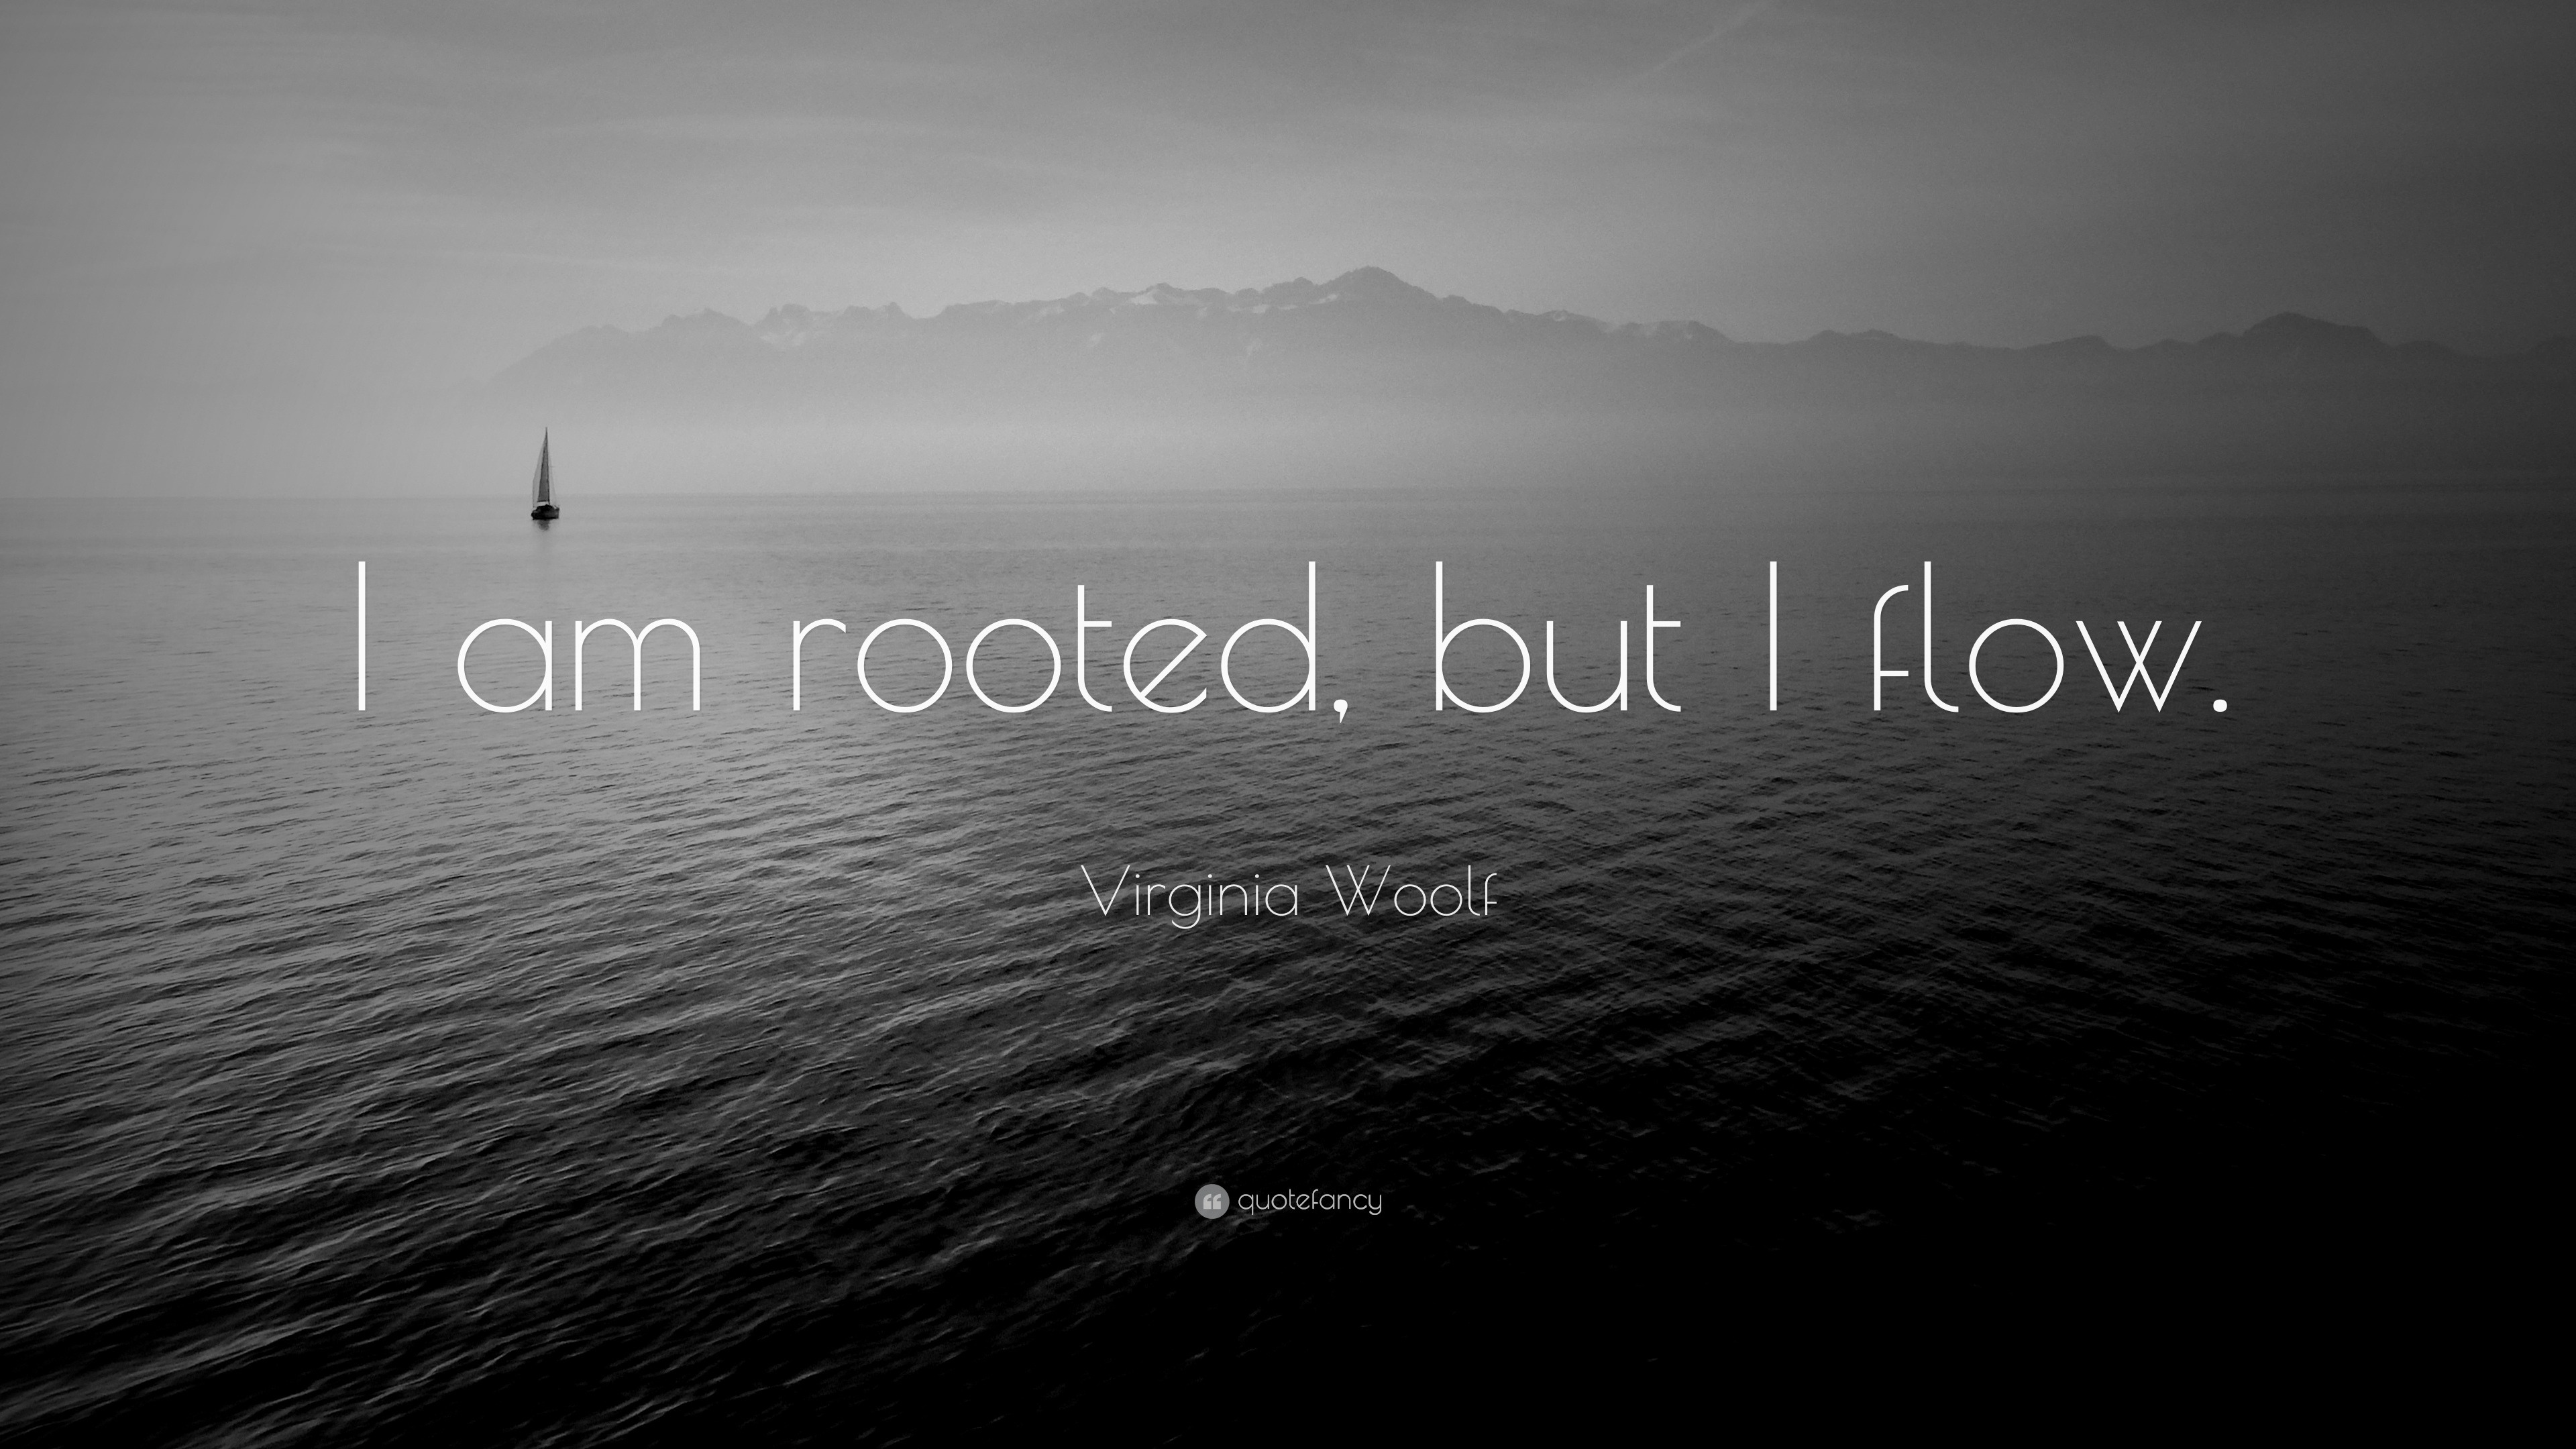 Virginia Woolf Quote: “I am rooted, but I flow.”